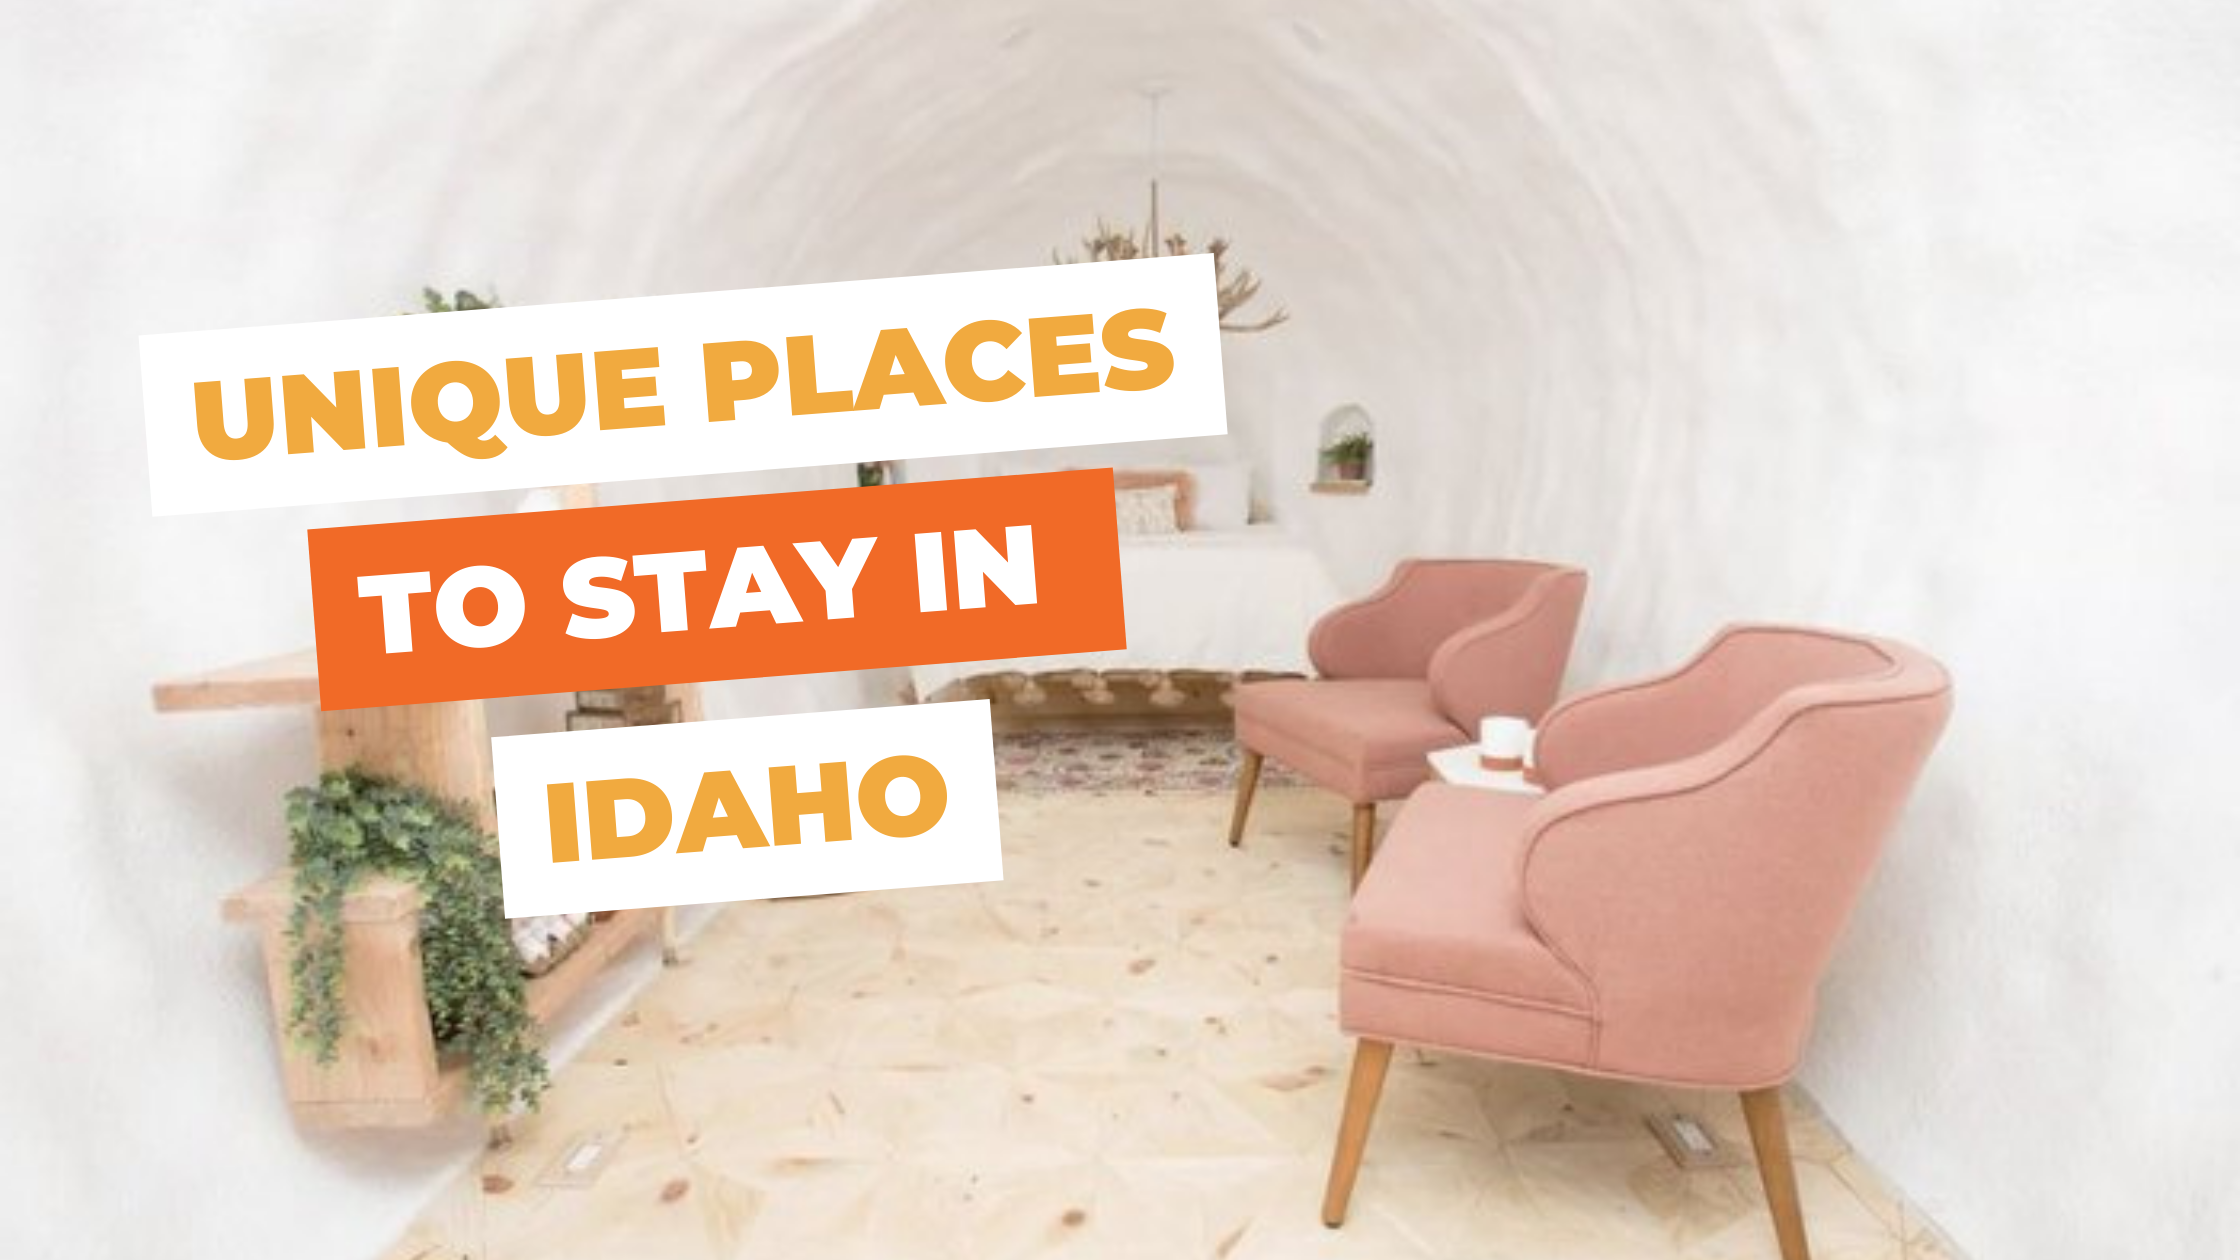 These 7 Unique Places To Stay In Idaho Will Give You An Unforgettable Experience